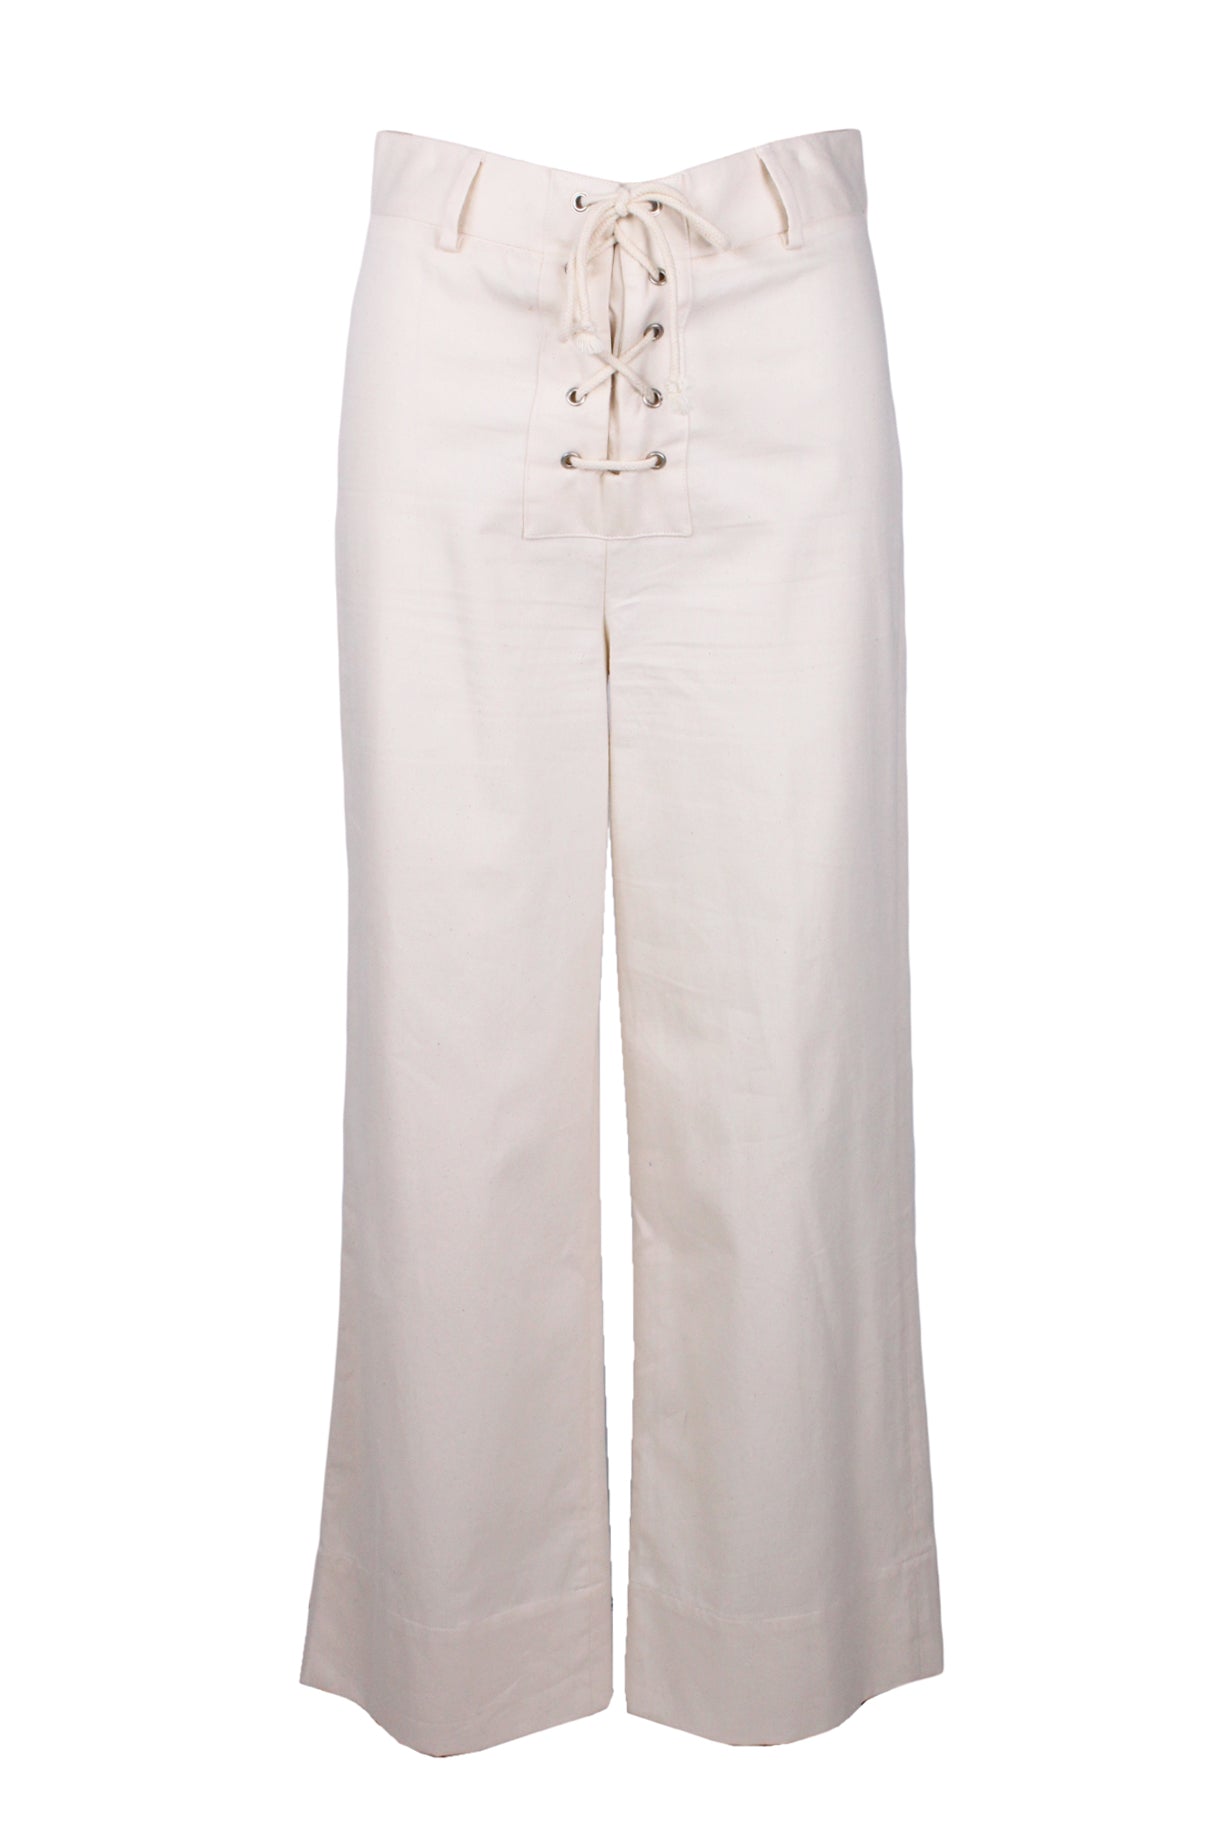 front of baserange off white wide leg pants. features waist loops, high-rise, tonal stitching, and eyelets with drawstring closure at front. 